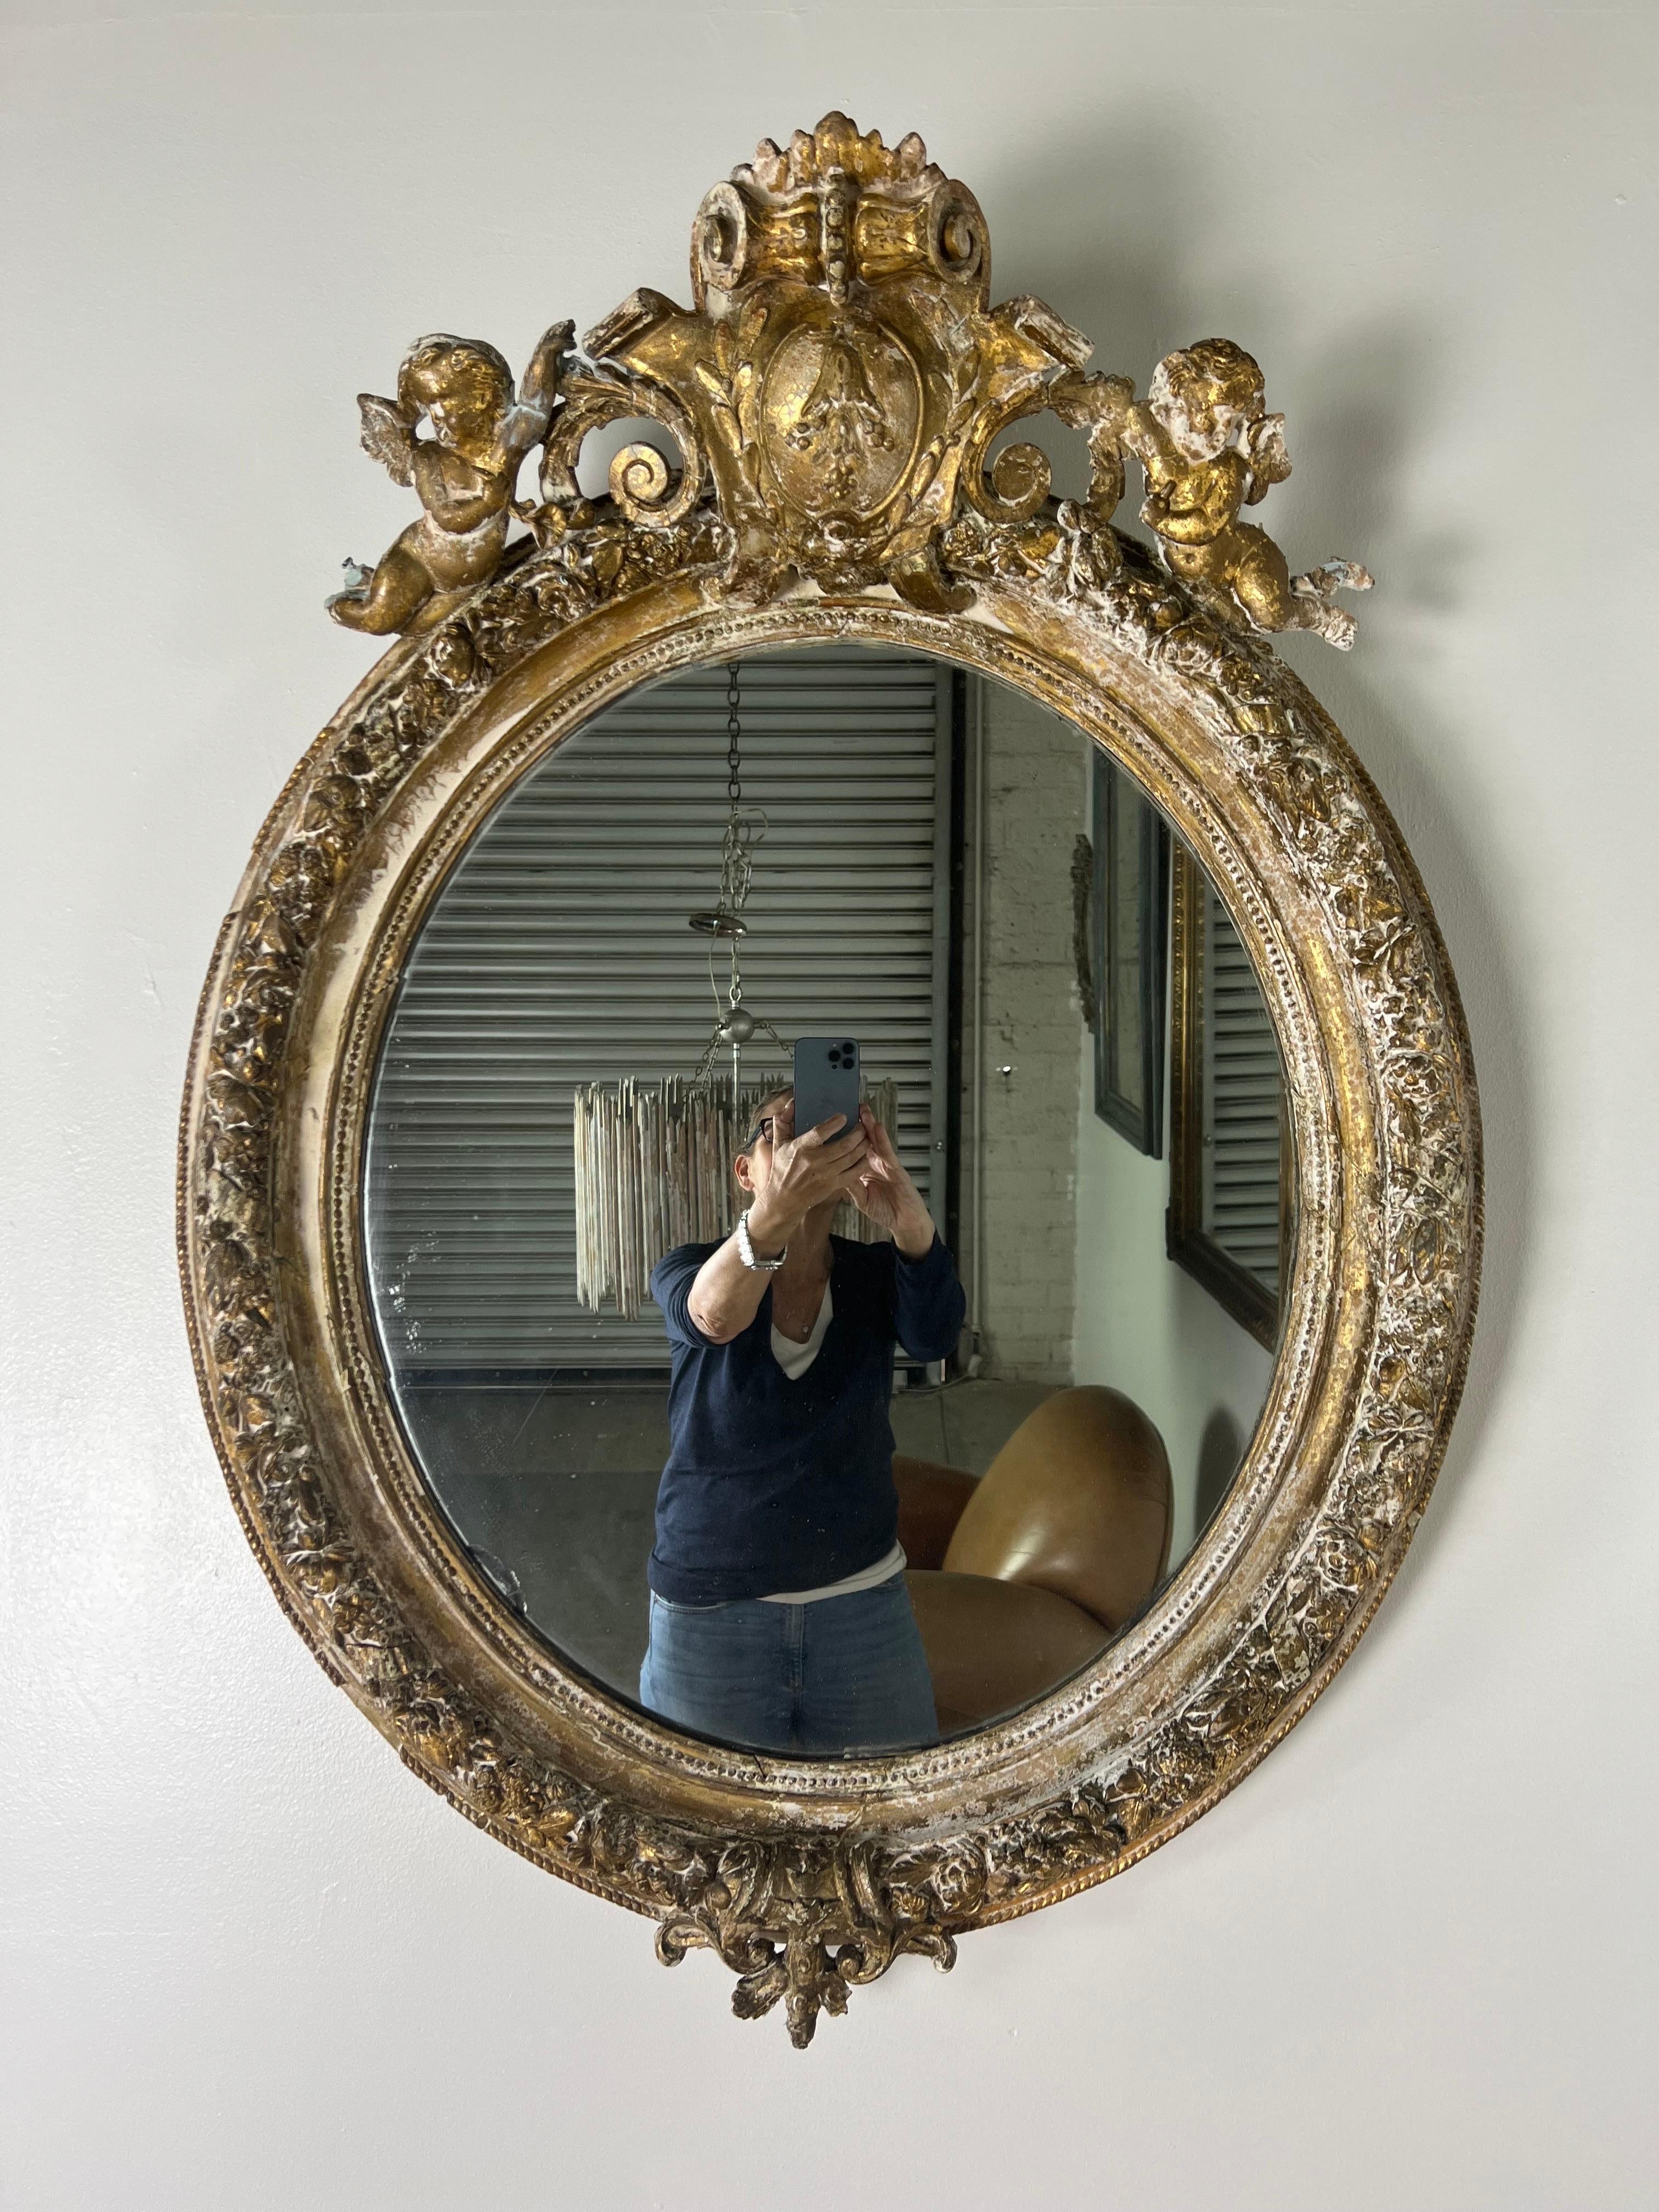 19th century French oval carved wood & gesso mirror with a worn gold leaf finish. There is a cartouche on the top that is flanked by two cherubs. The mirror is original and has begun to antique.